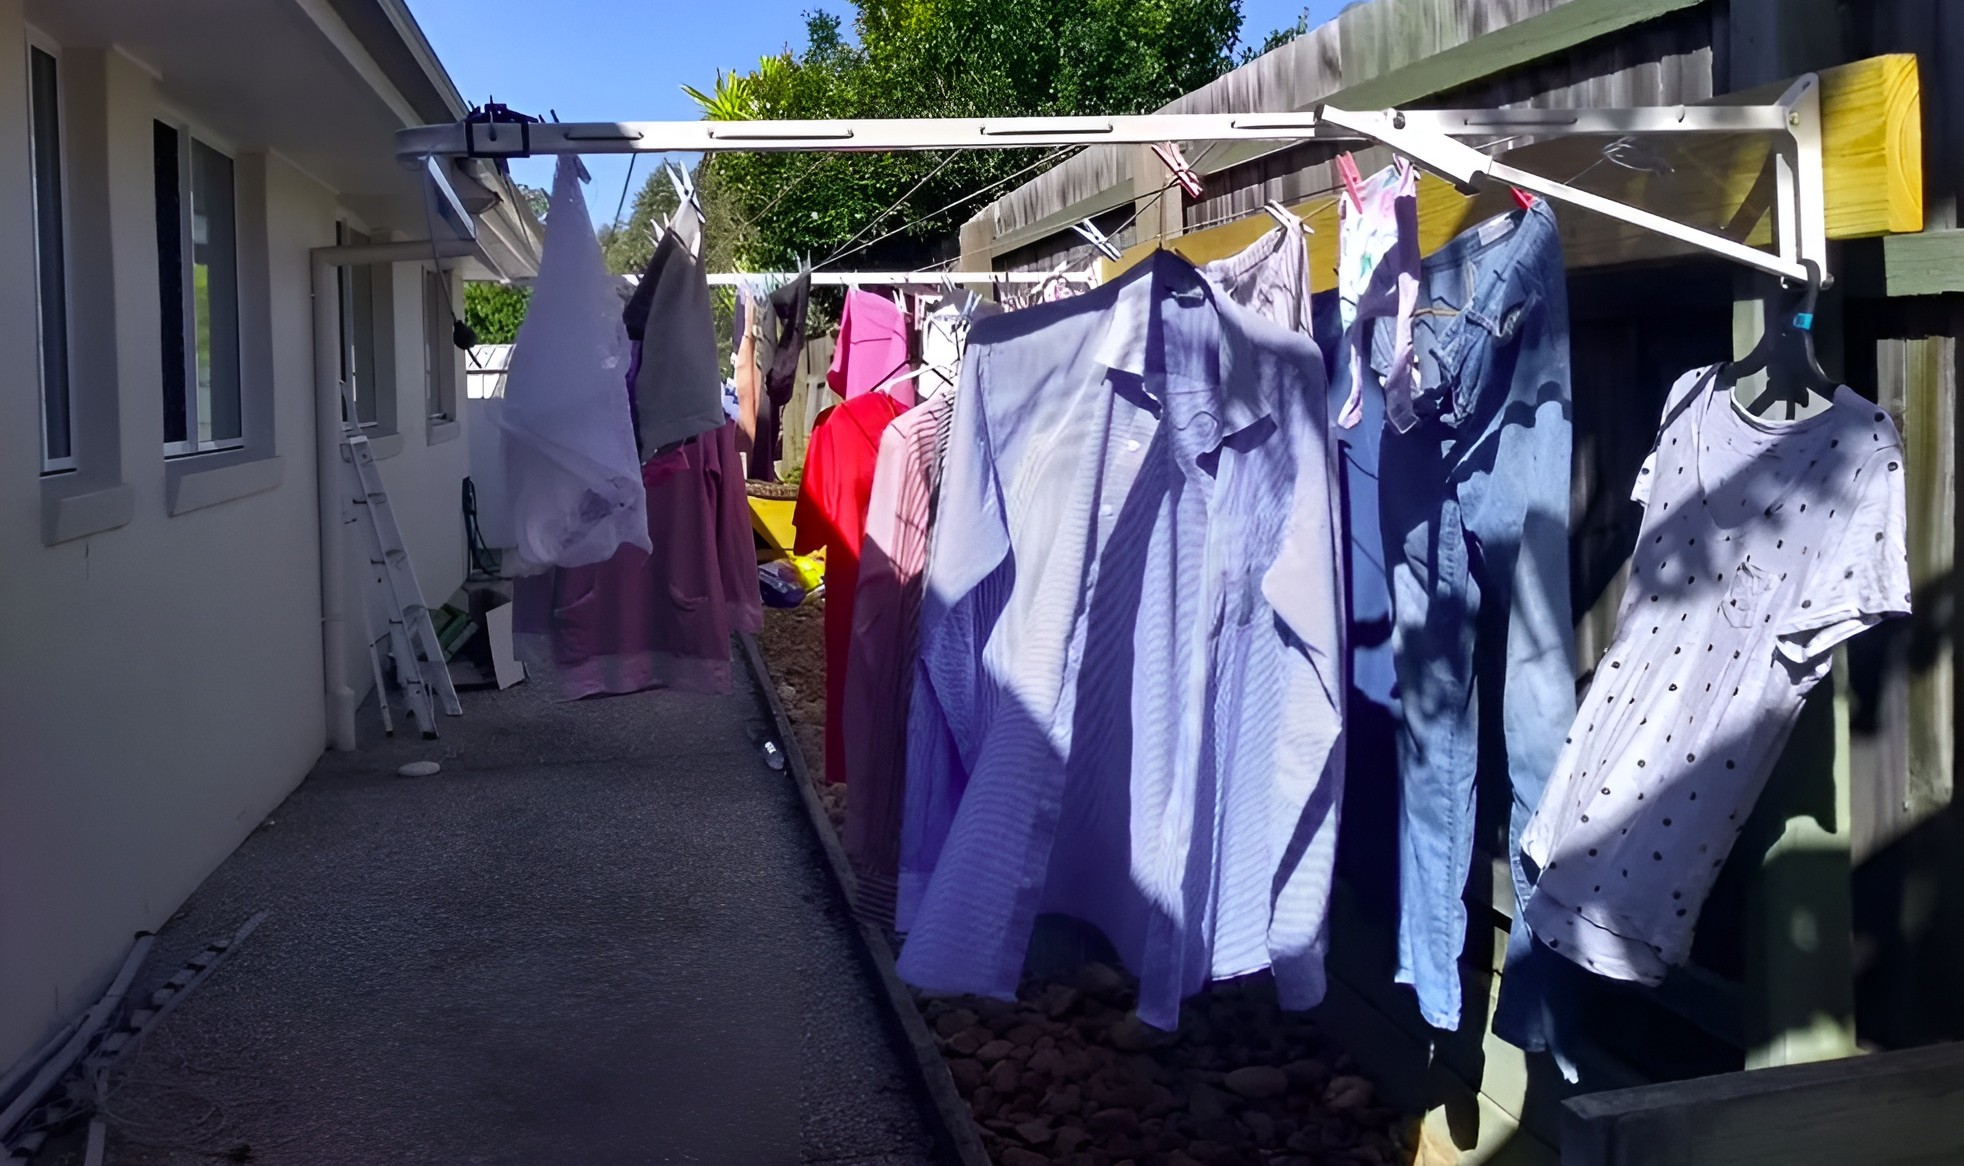 Fold Away Clothesline The Ultimate Guide to Australia's Top 7 Picks for Fold Away Clothesline Models